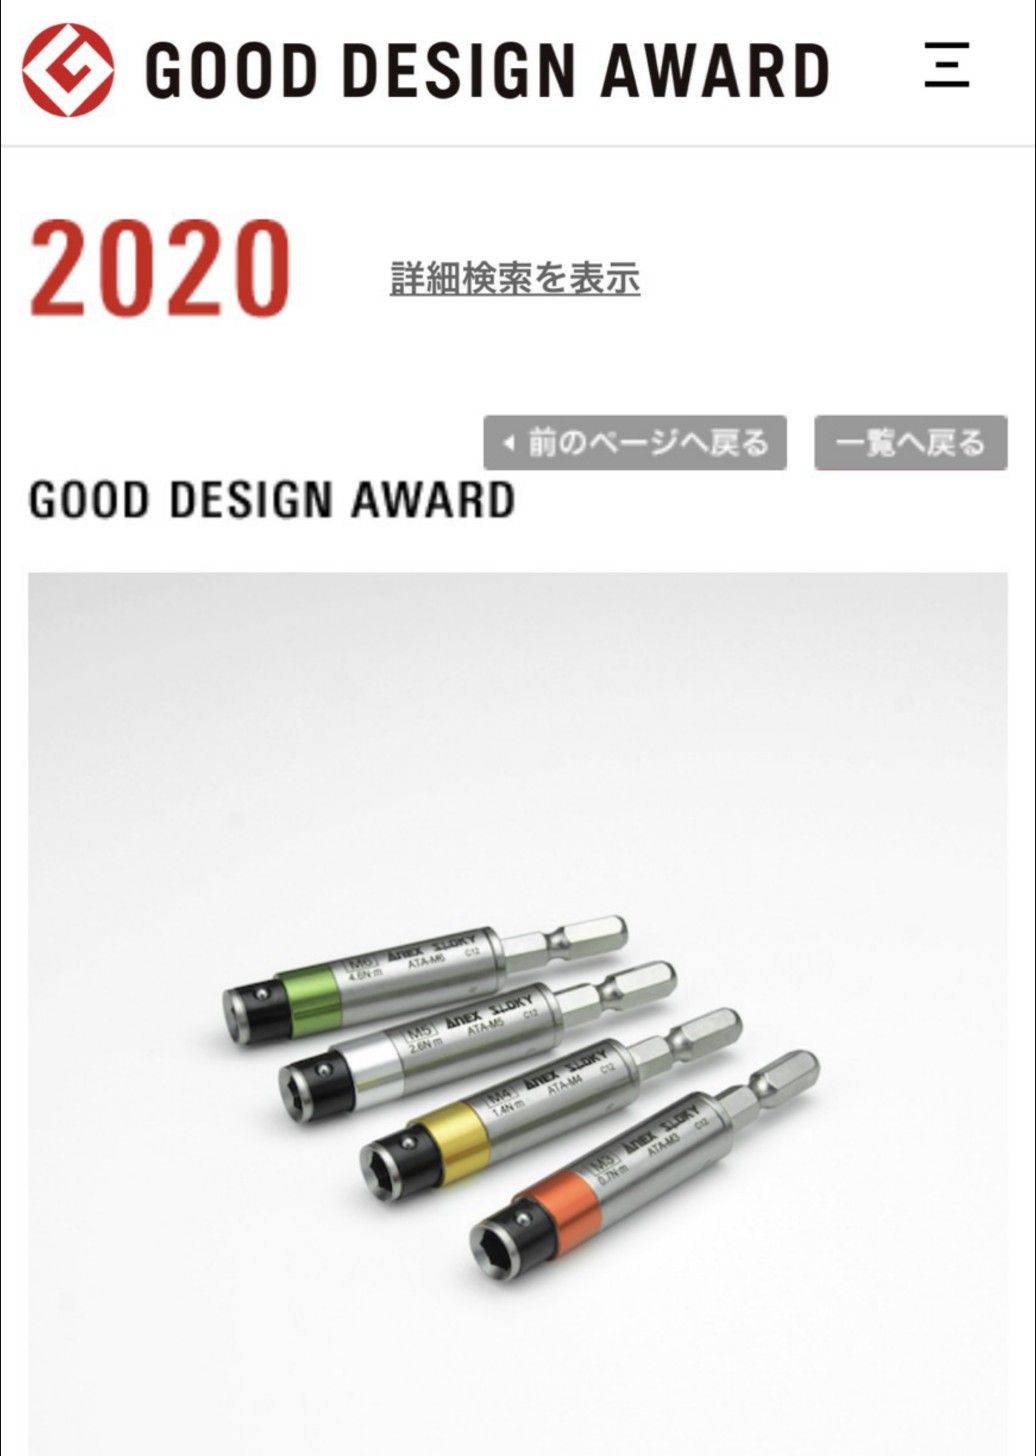 Good Design awarded torque screwdriver [torque control adopter for electrical work] by Anex and Sloky